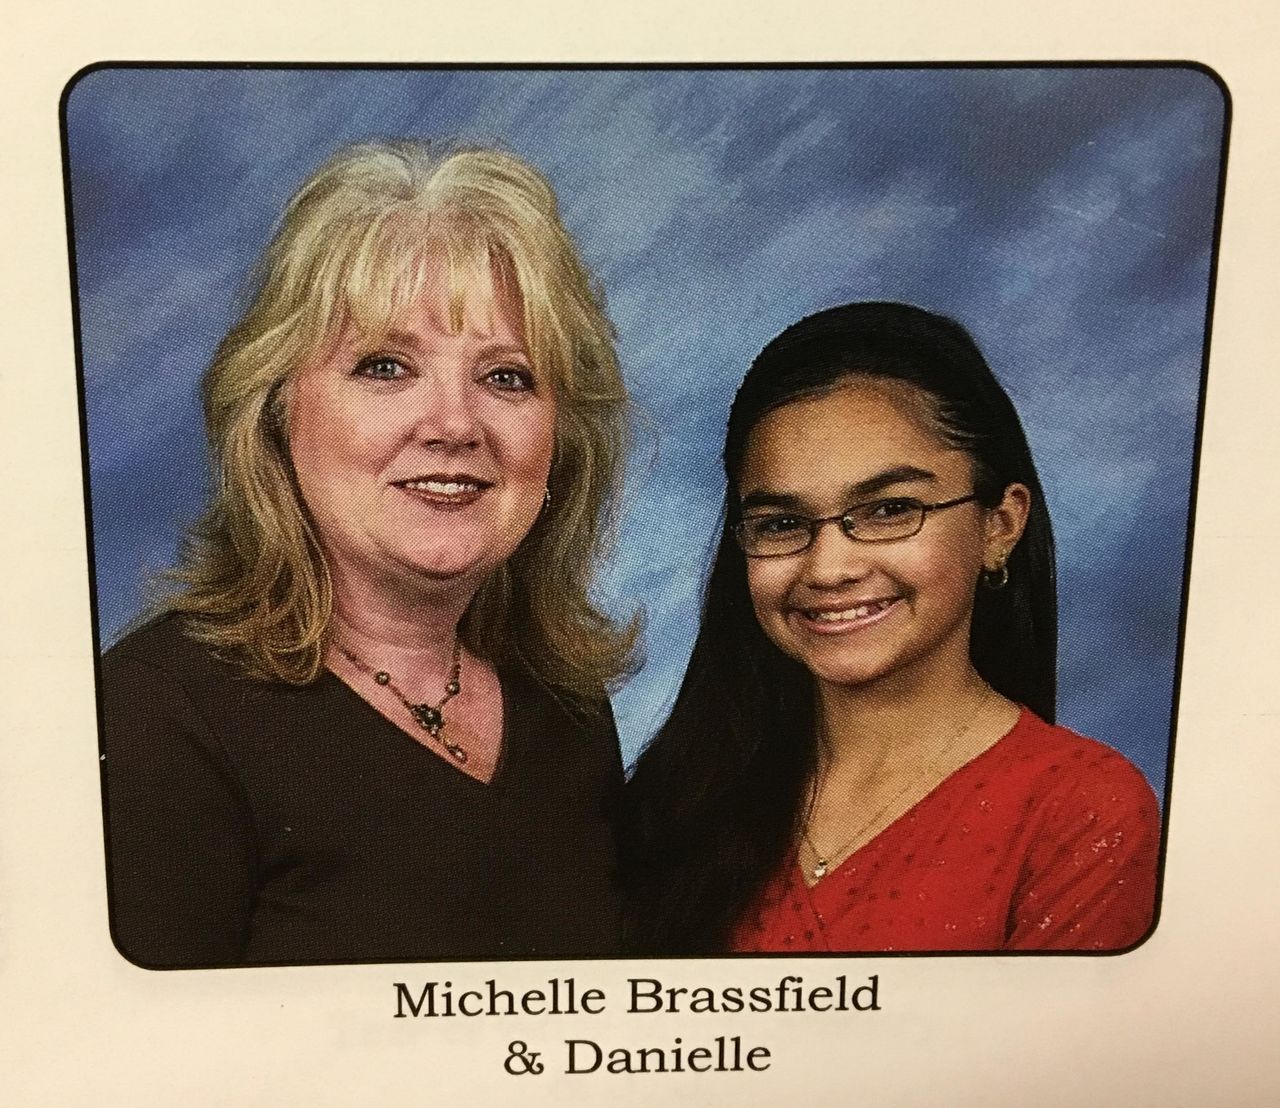 An undated church directory photo of Danielle and her mother, Michelle, whose married name was then Brassfield. Danielle's husband, Devin Kelley, was apparently targeting his mother-in-law, now Michelle Shields, when he went to the church.